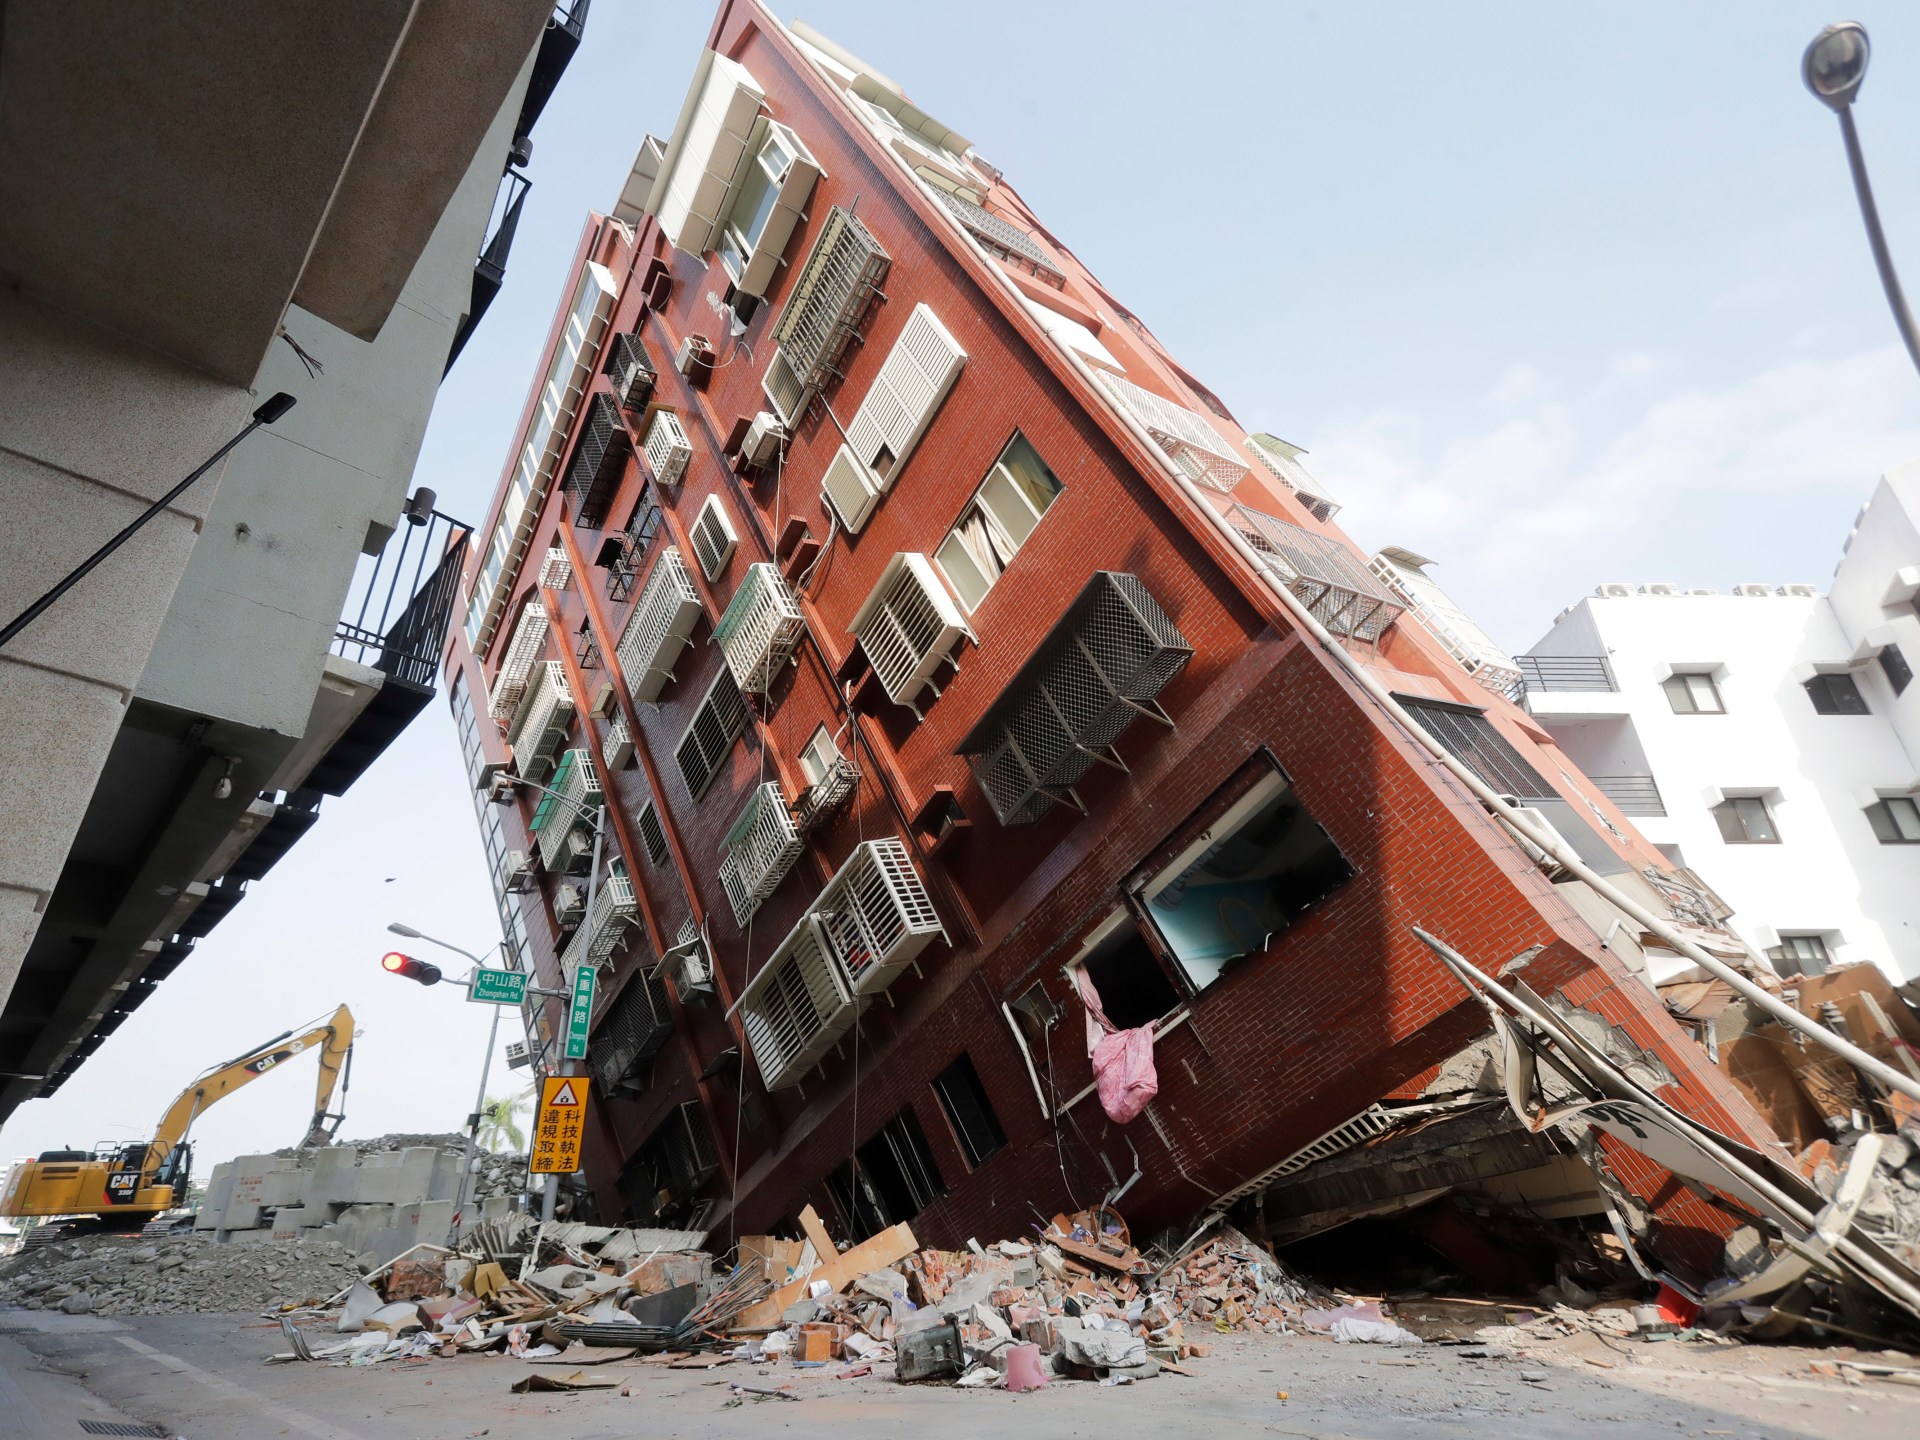 Taiwan says 1,000 injured in earthquake, rescue efforts focus on Hualien